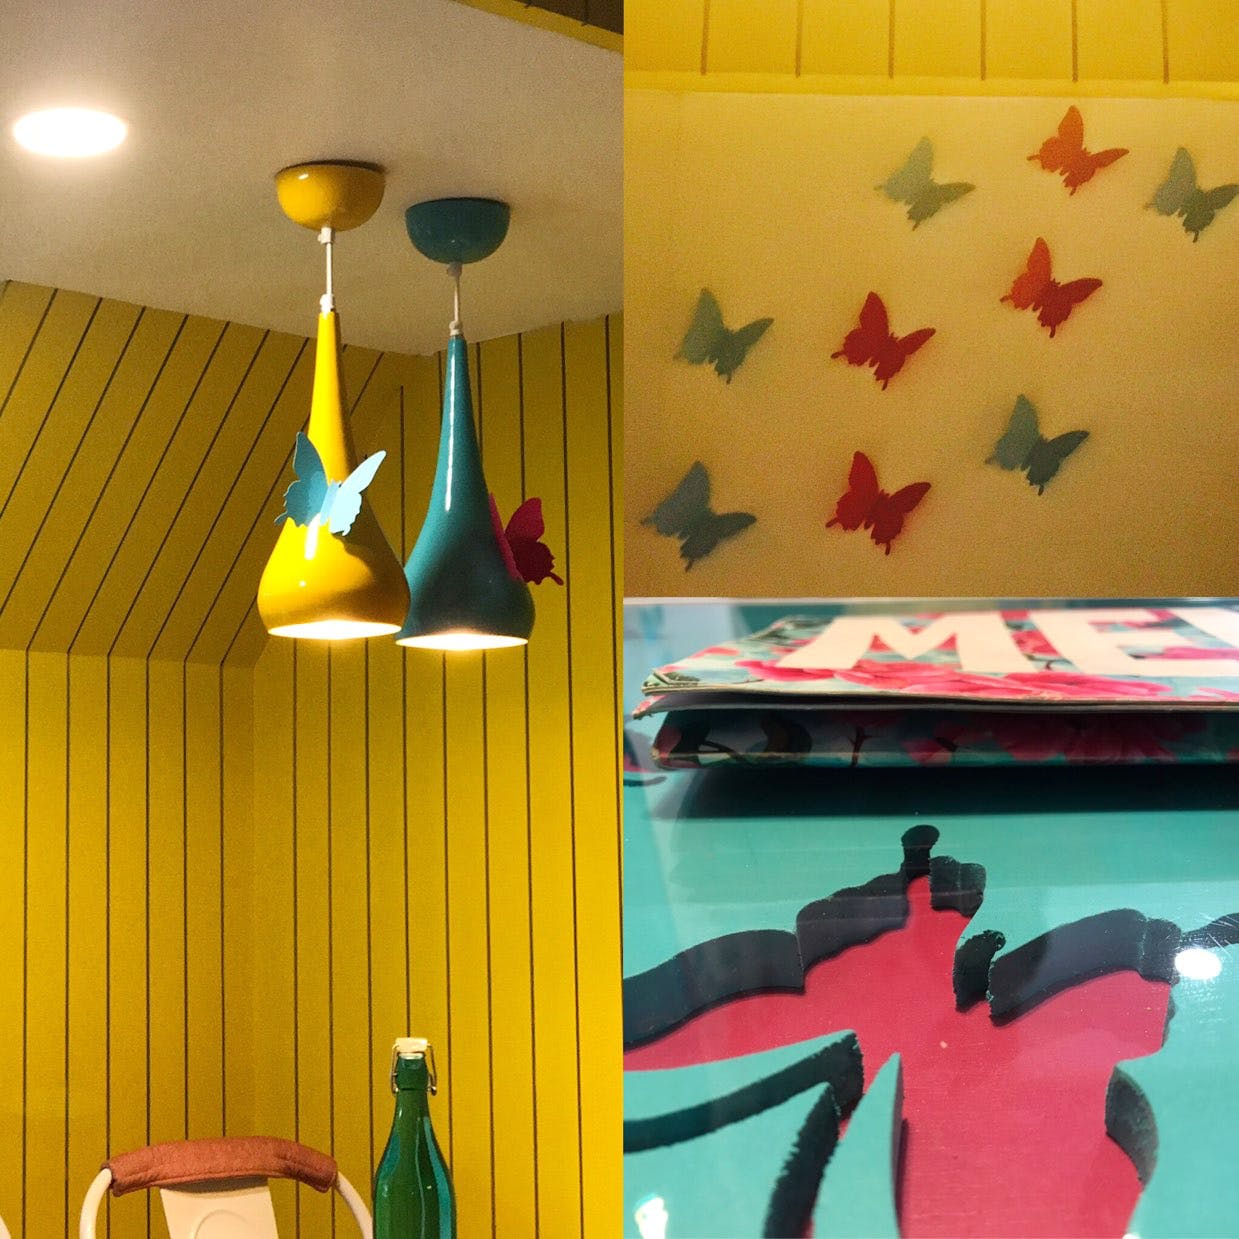 Room,Yellow,Lighting,Wall,Turquoise,Lighting accessory,Ceiling,Interior design,Lampshade,Textile